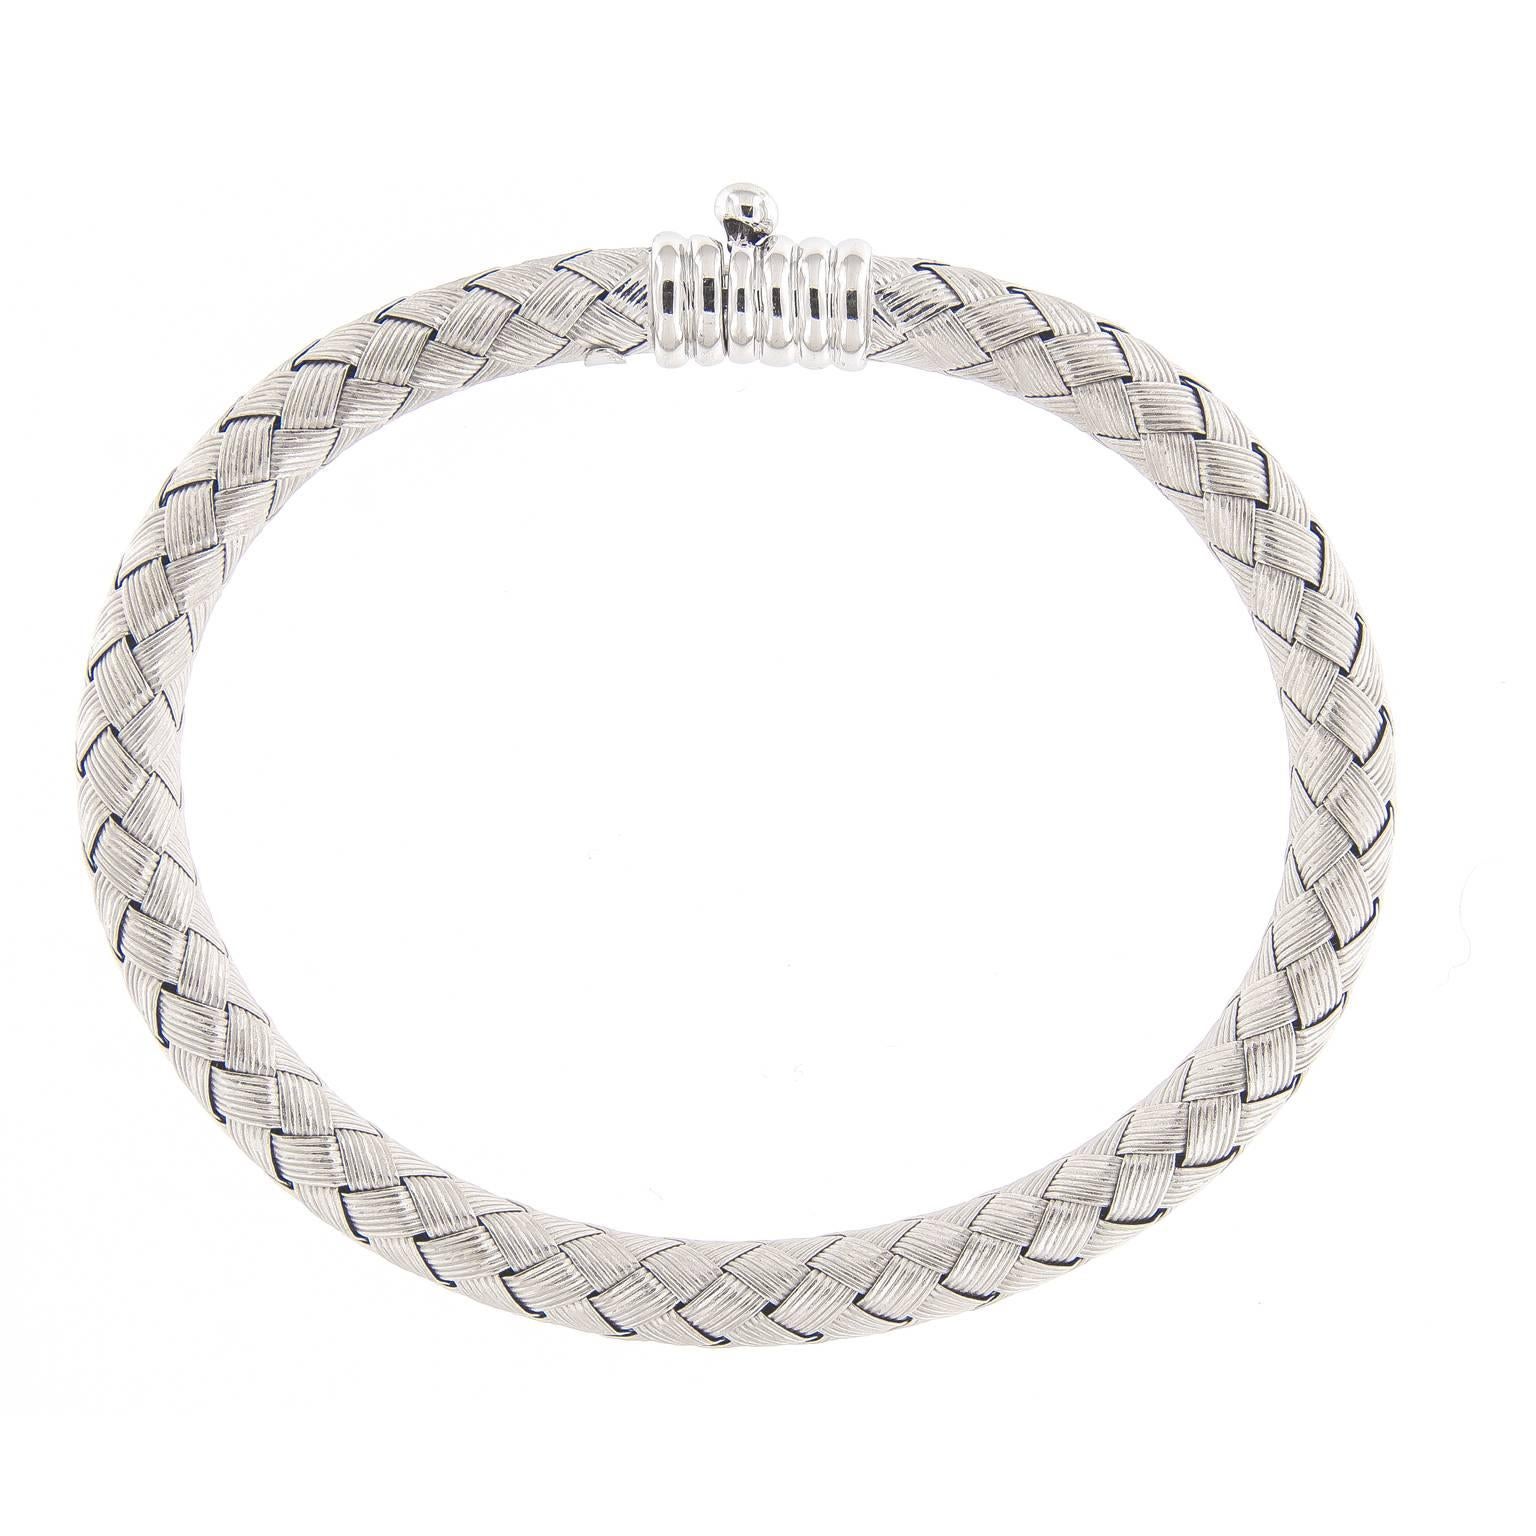 This beautiful Italian bracelet is done with woven
textured sheets of 18k white gold. The finish is a soft
bangle with a smooth feel on the skin. Features a
safety clasp that keeps this piece nice and secure.

Weighs 17.1 grams.
2 in ( 5.08